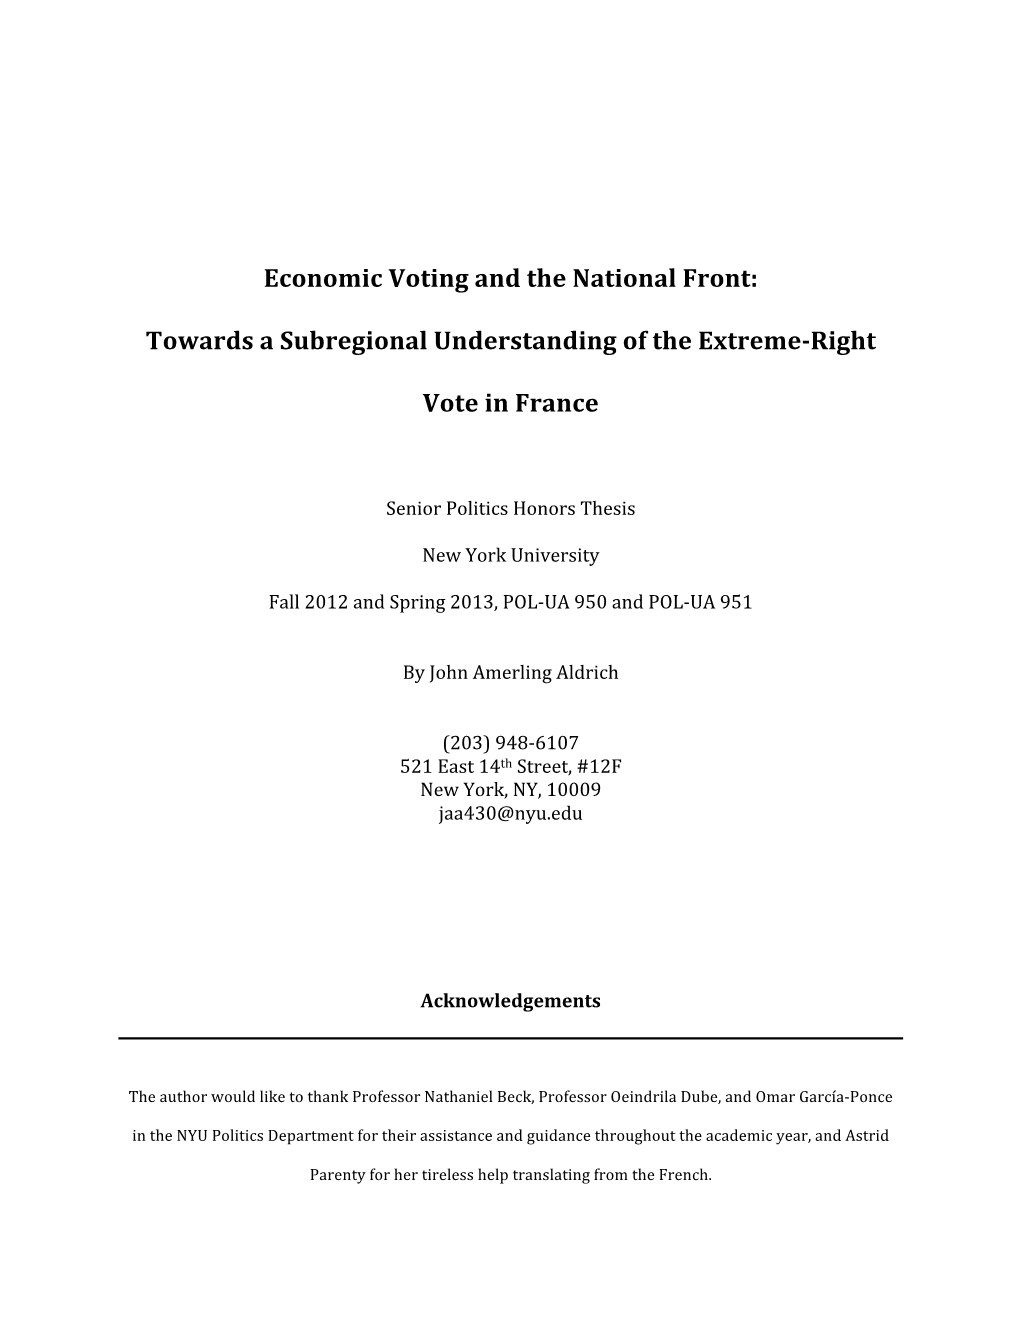 Economic Voting and the National Front